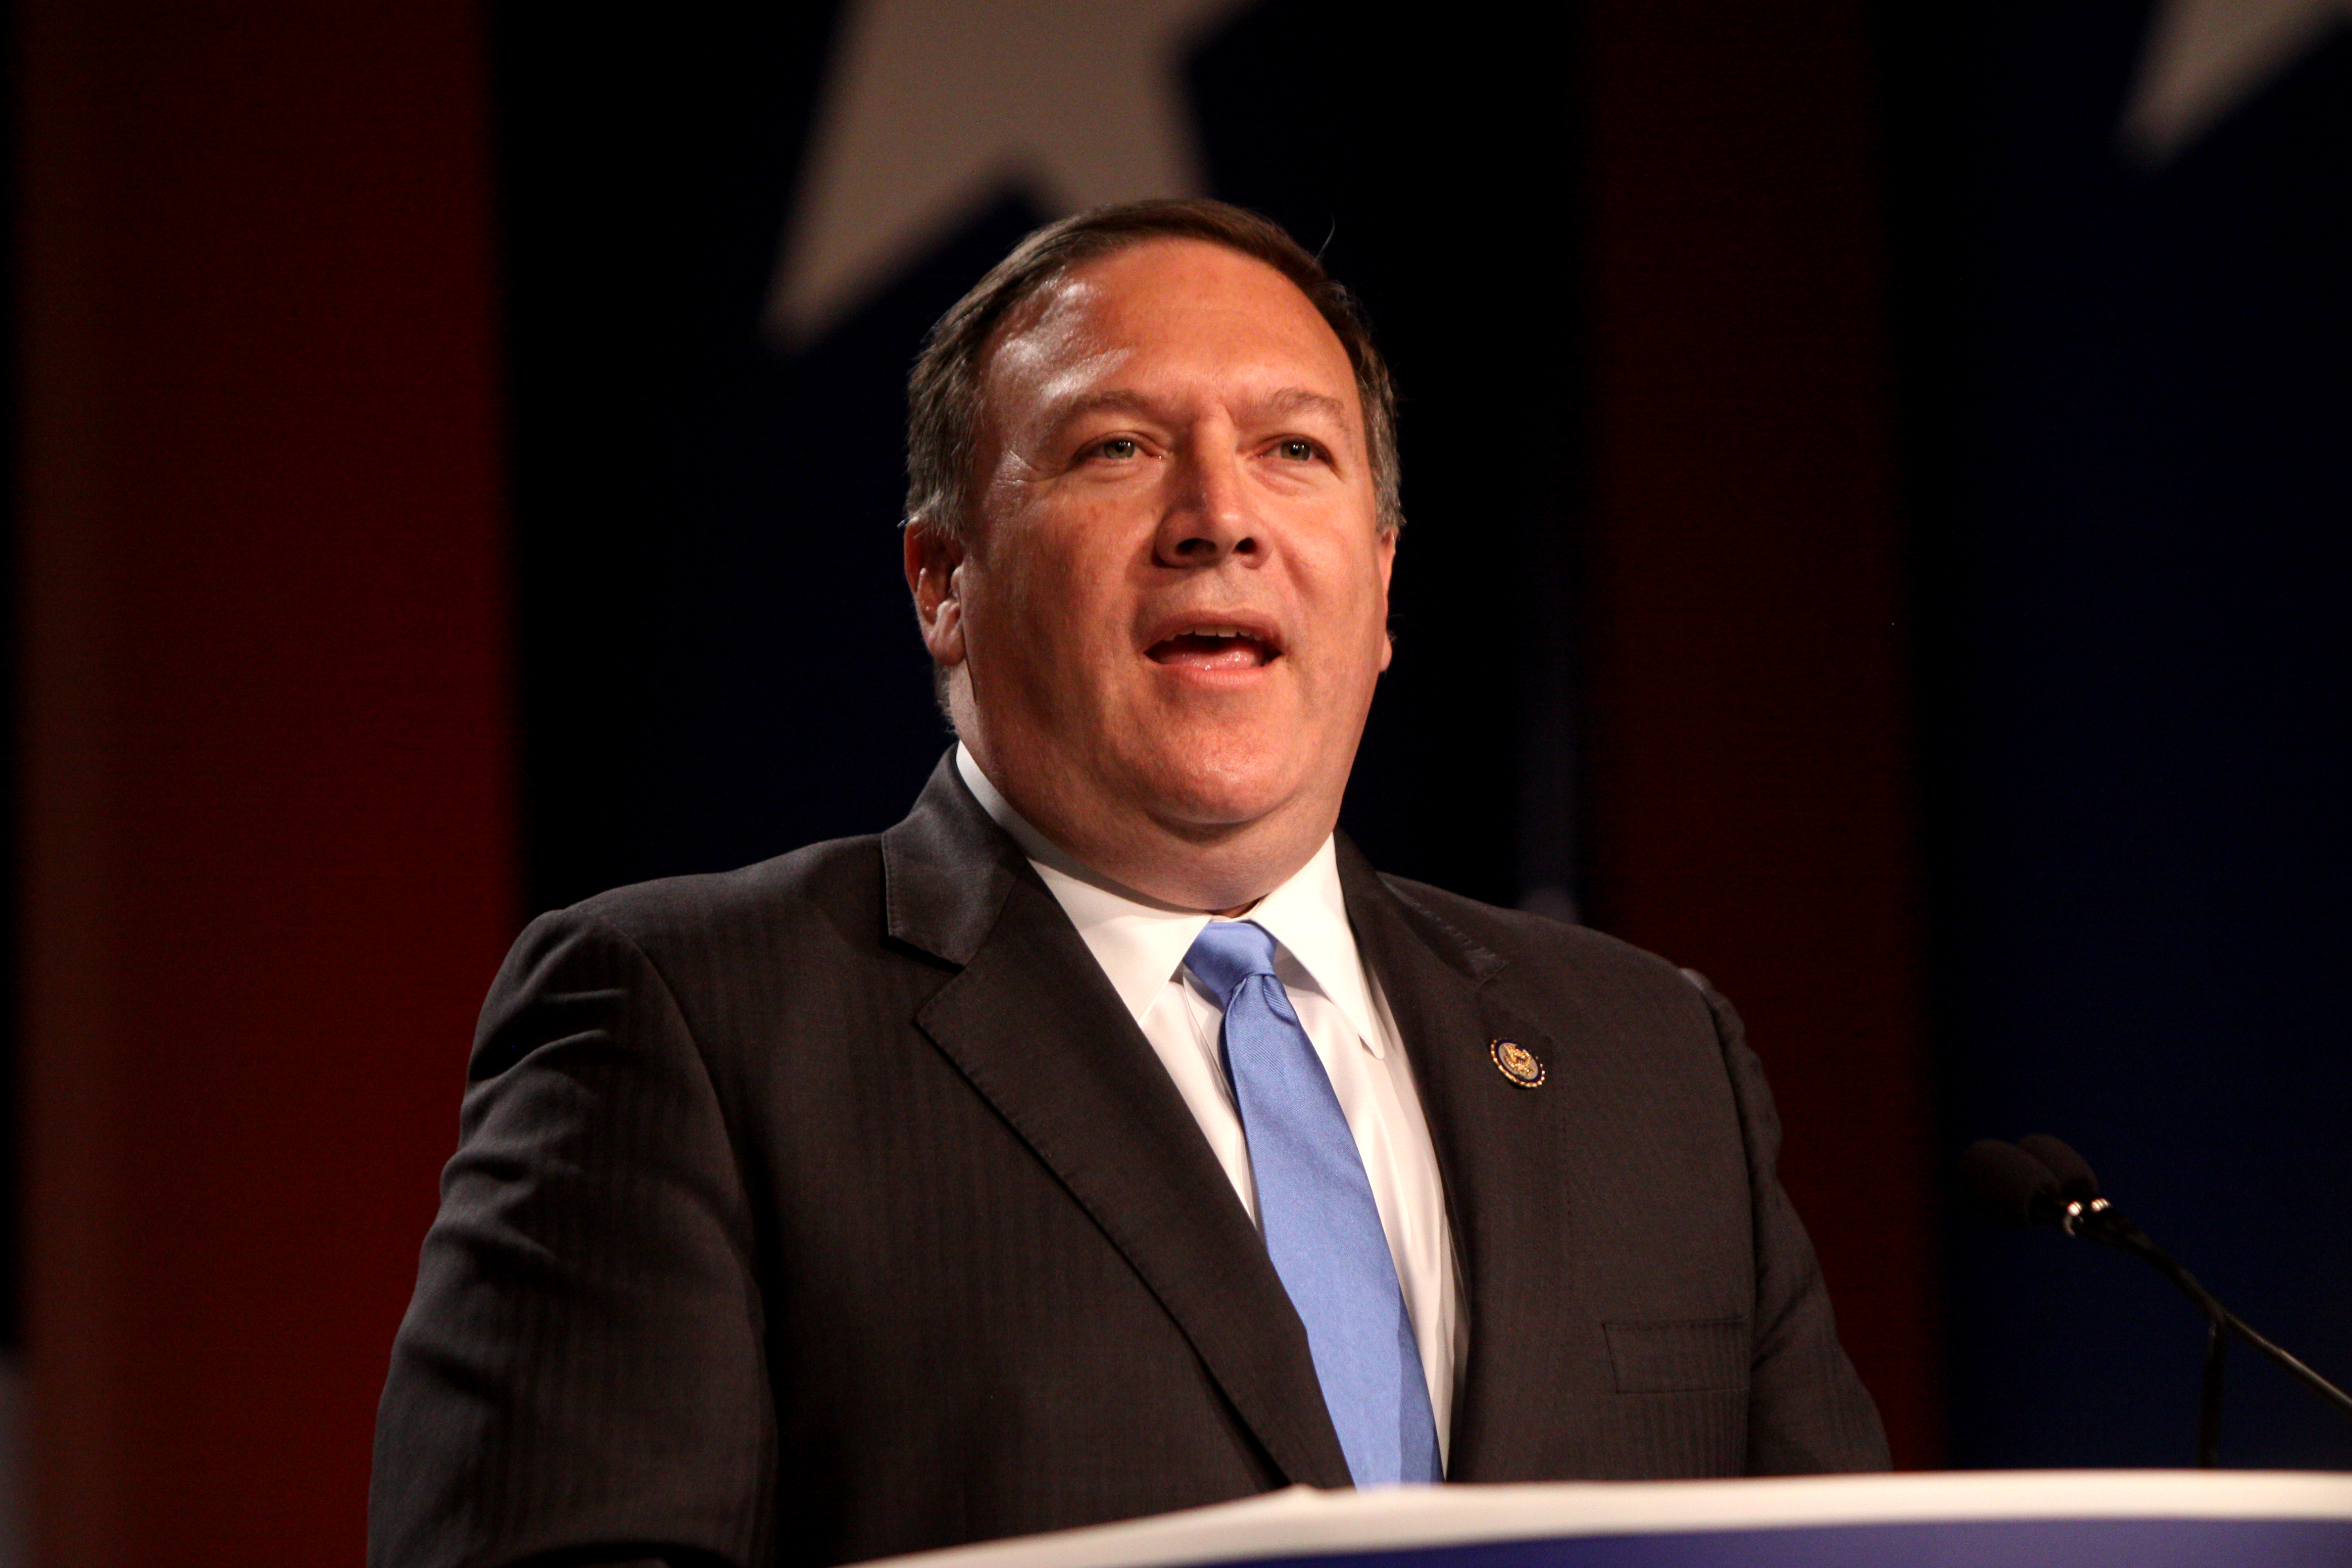 Americans born in Jerusalem can now list Israel as birthplace: Pompeo